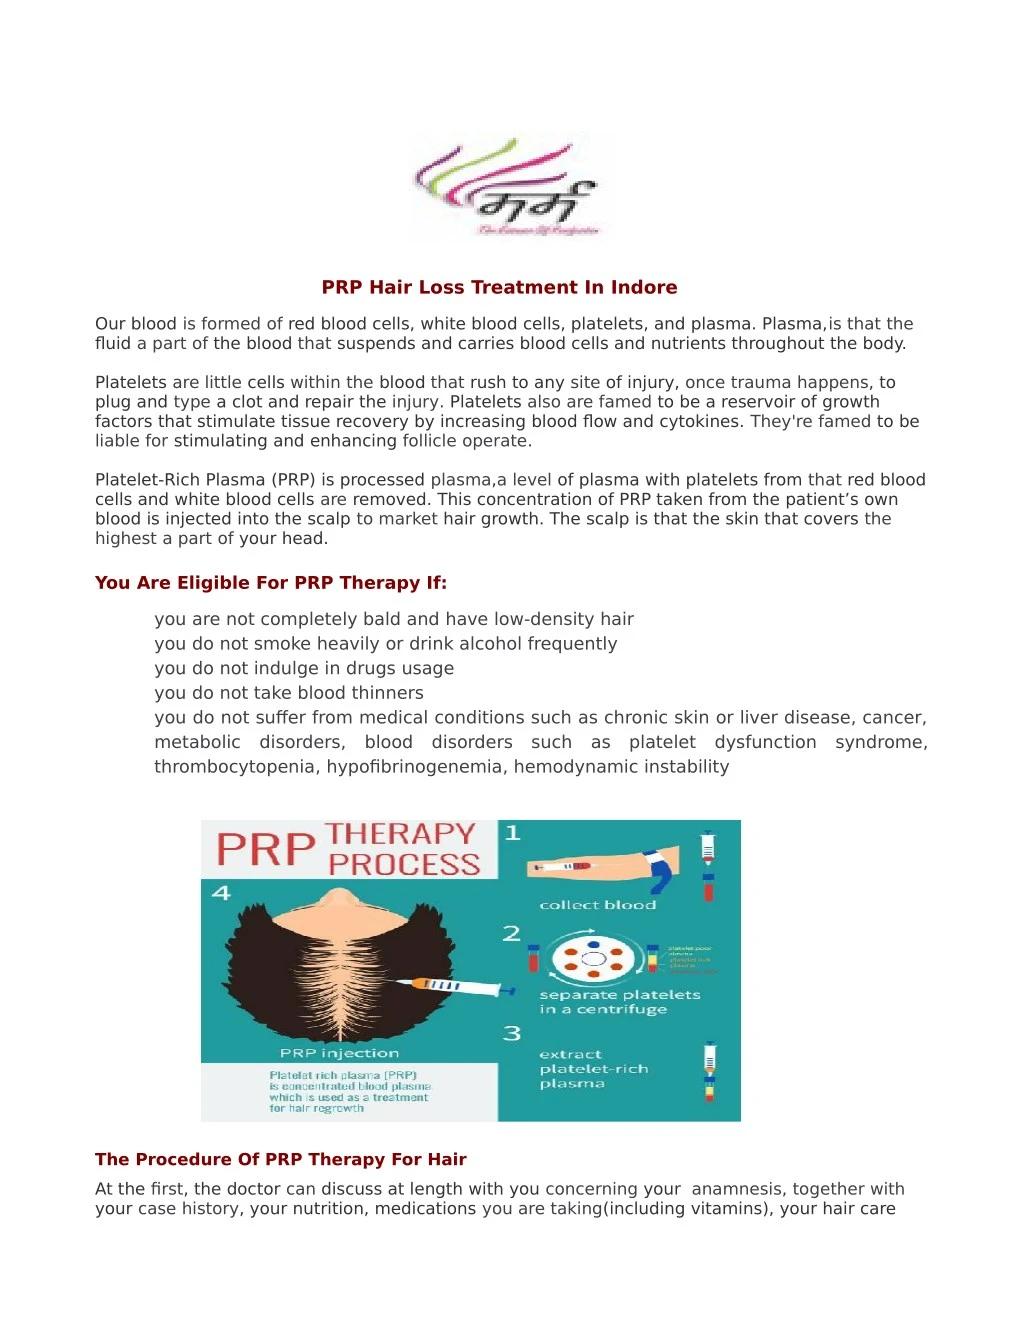 prp hair loss treatment in indore